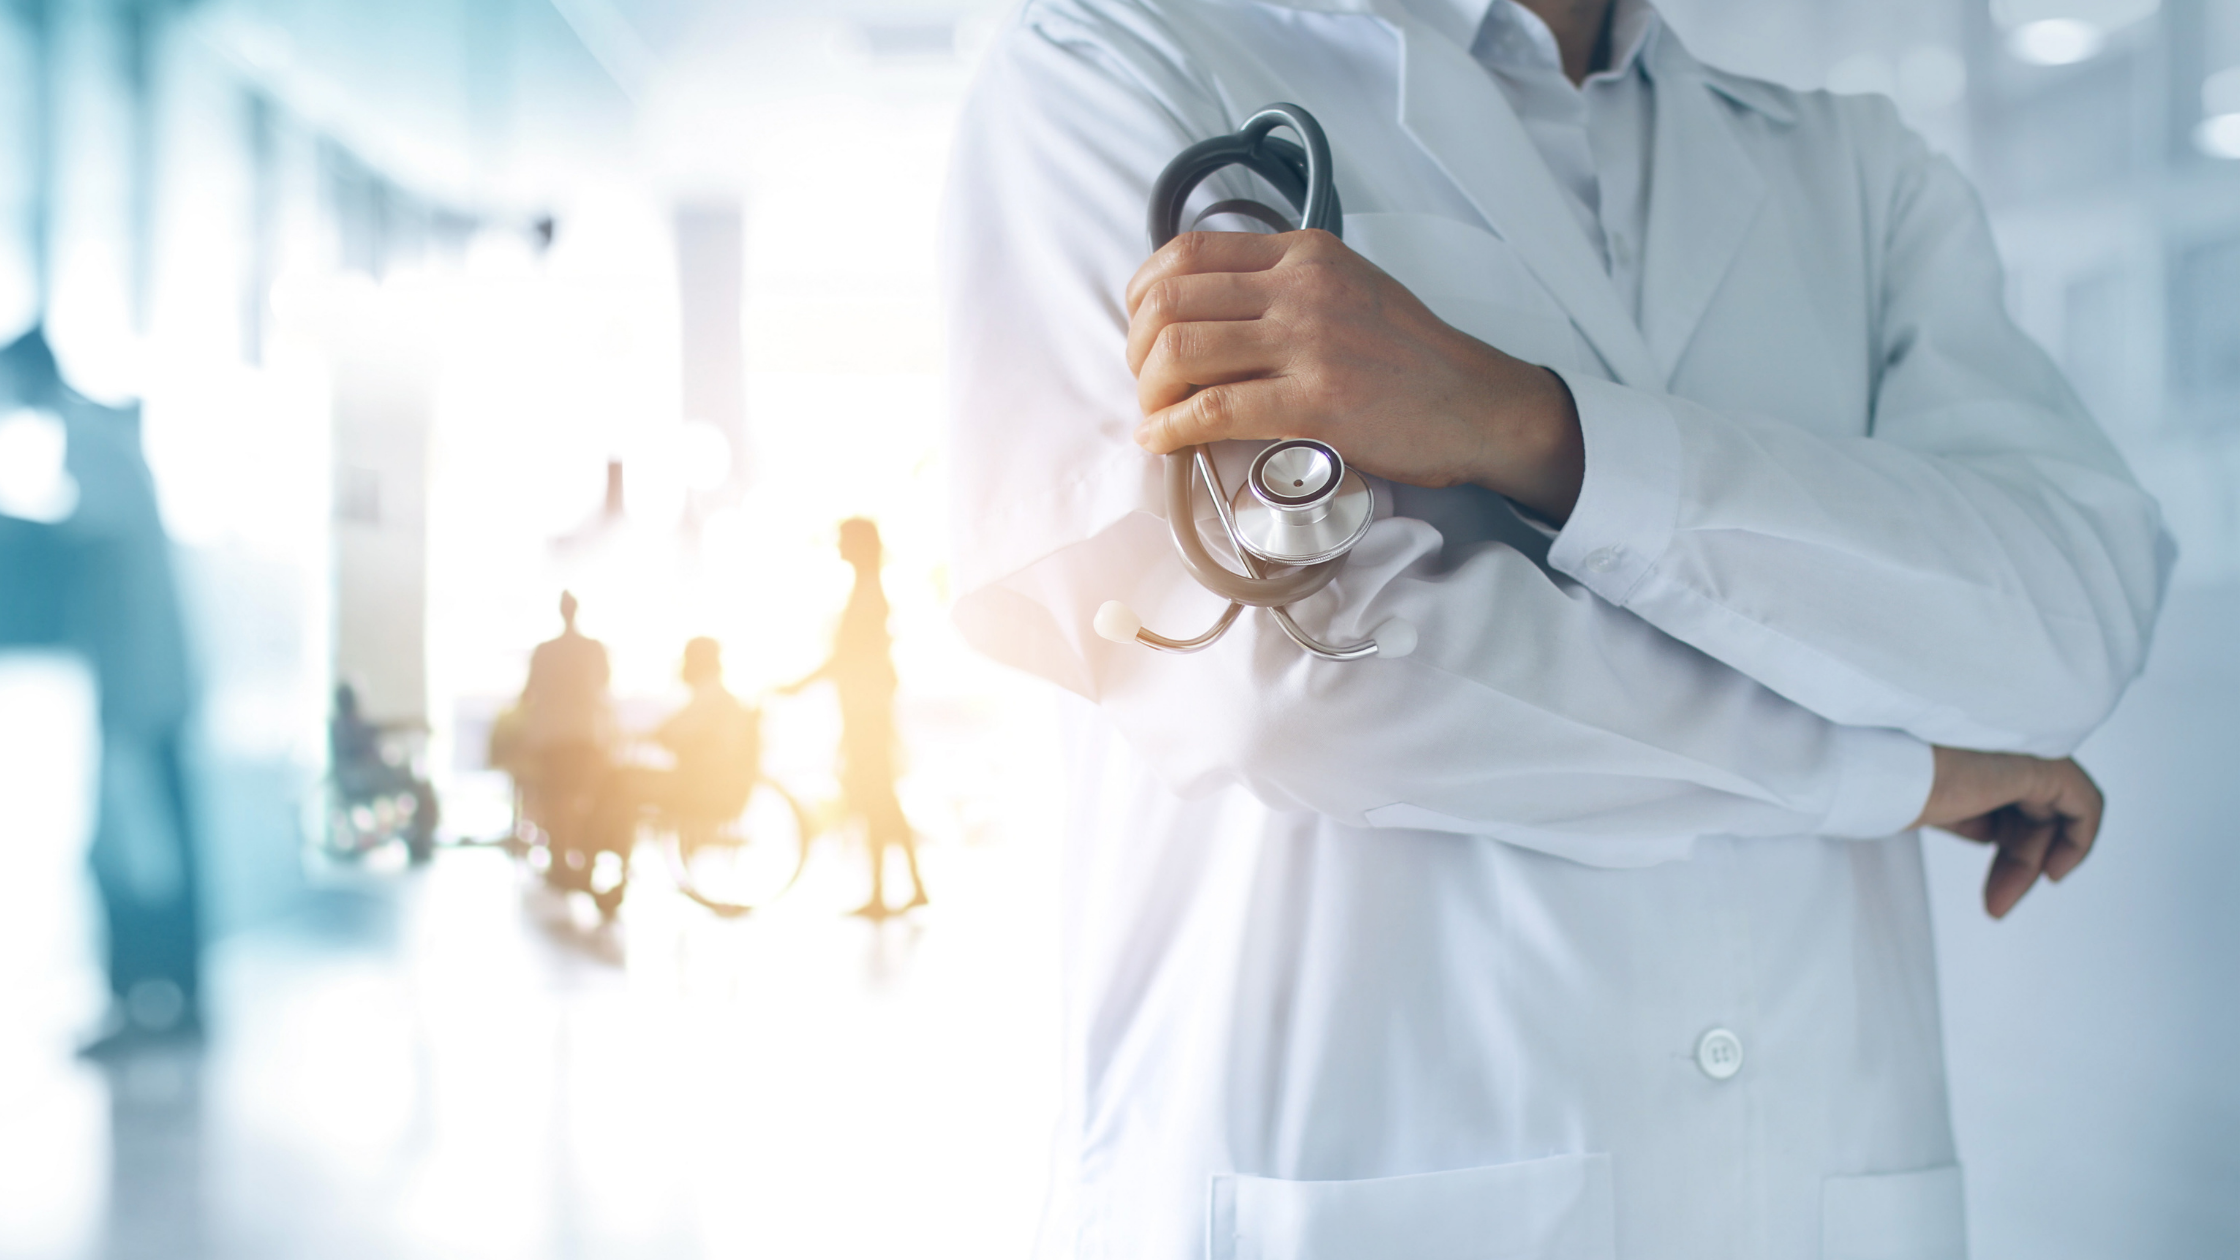 The consolidation of hospitals and providers into larger health systems is changing the landscape of how health care is delivered across the country.